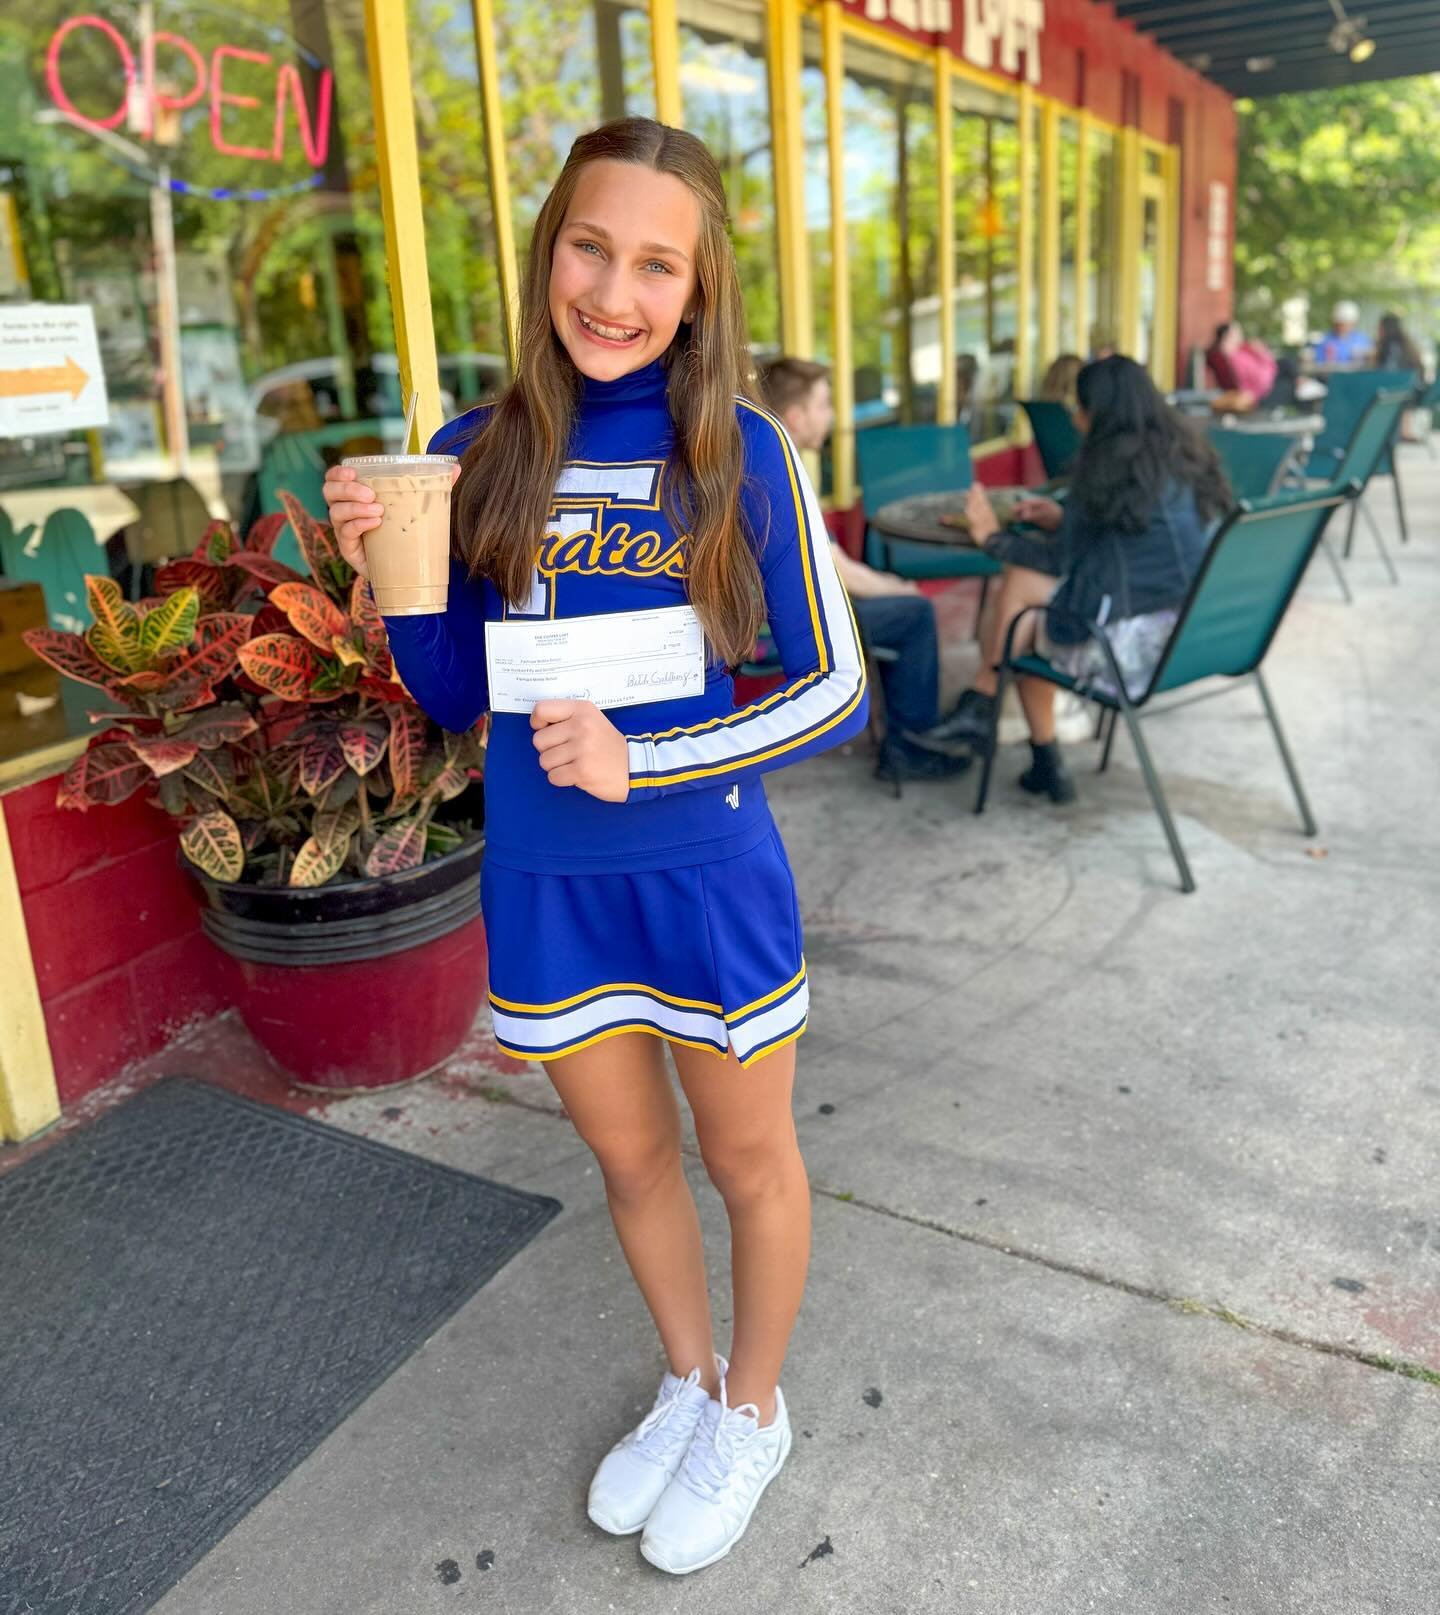 Shout out to Fairhope Elementary Cheerleads and Emory! Thank you guys for letting us sponsor you! GO PIRATES🏴&zwj;☠️💣! 

#sponsorship #support #fairhope #pirates #local